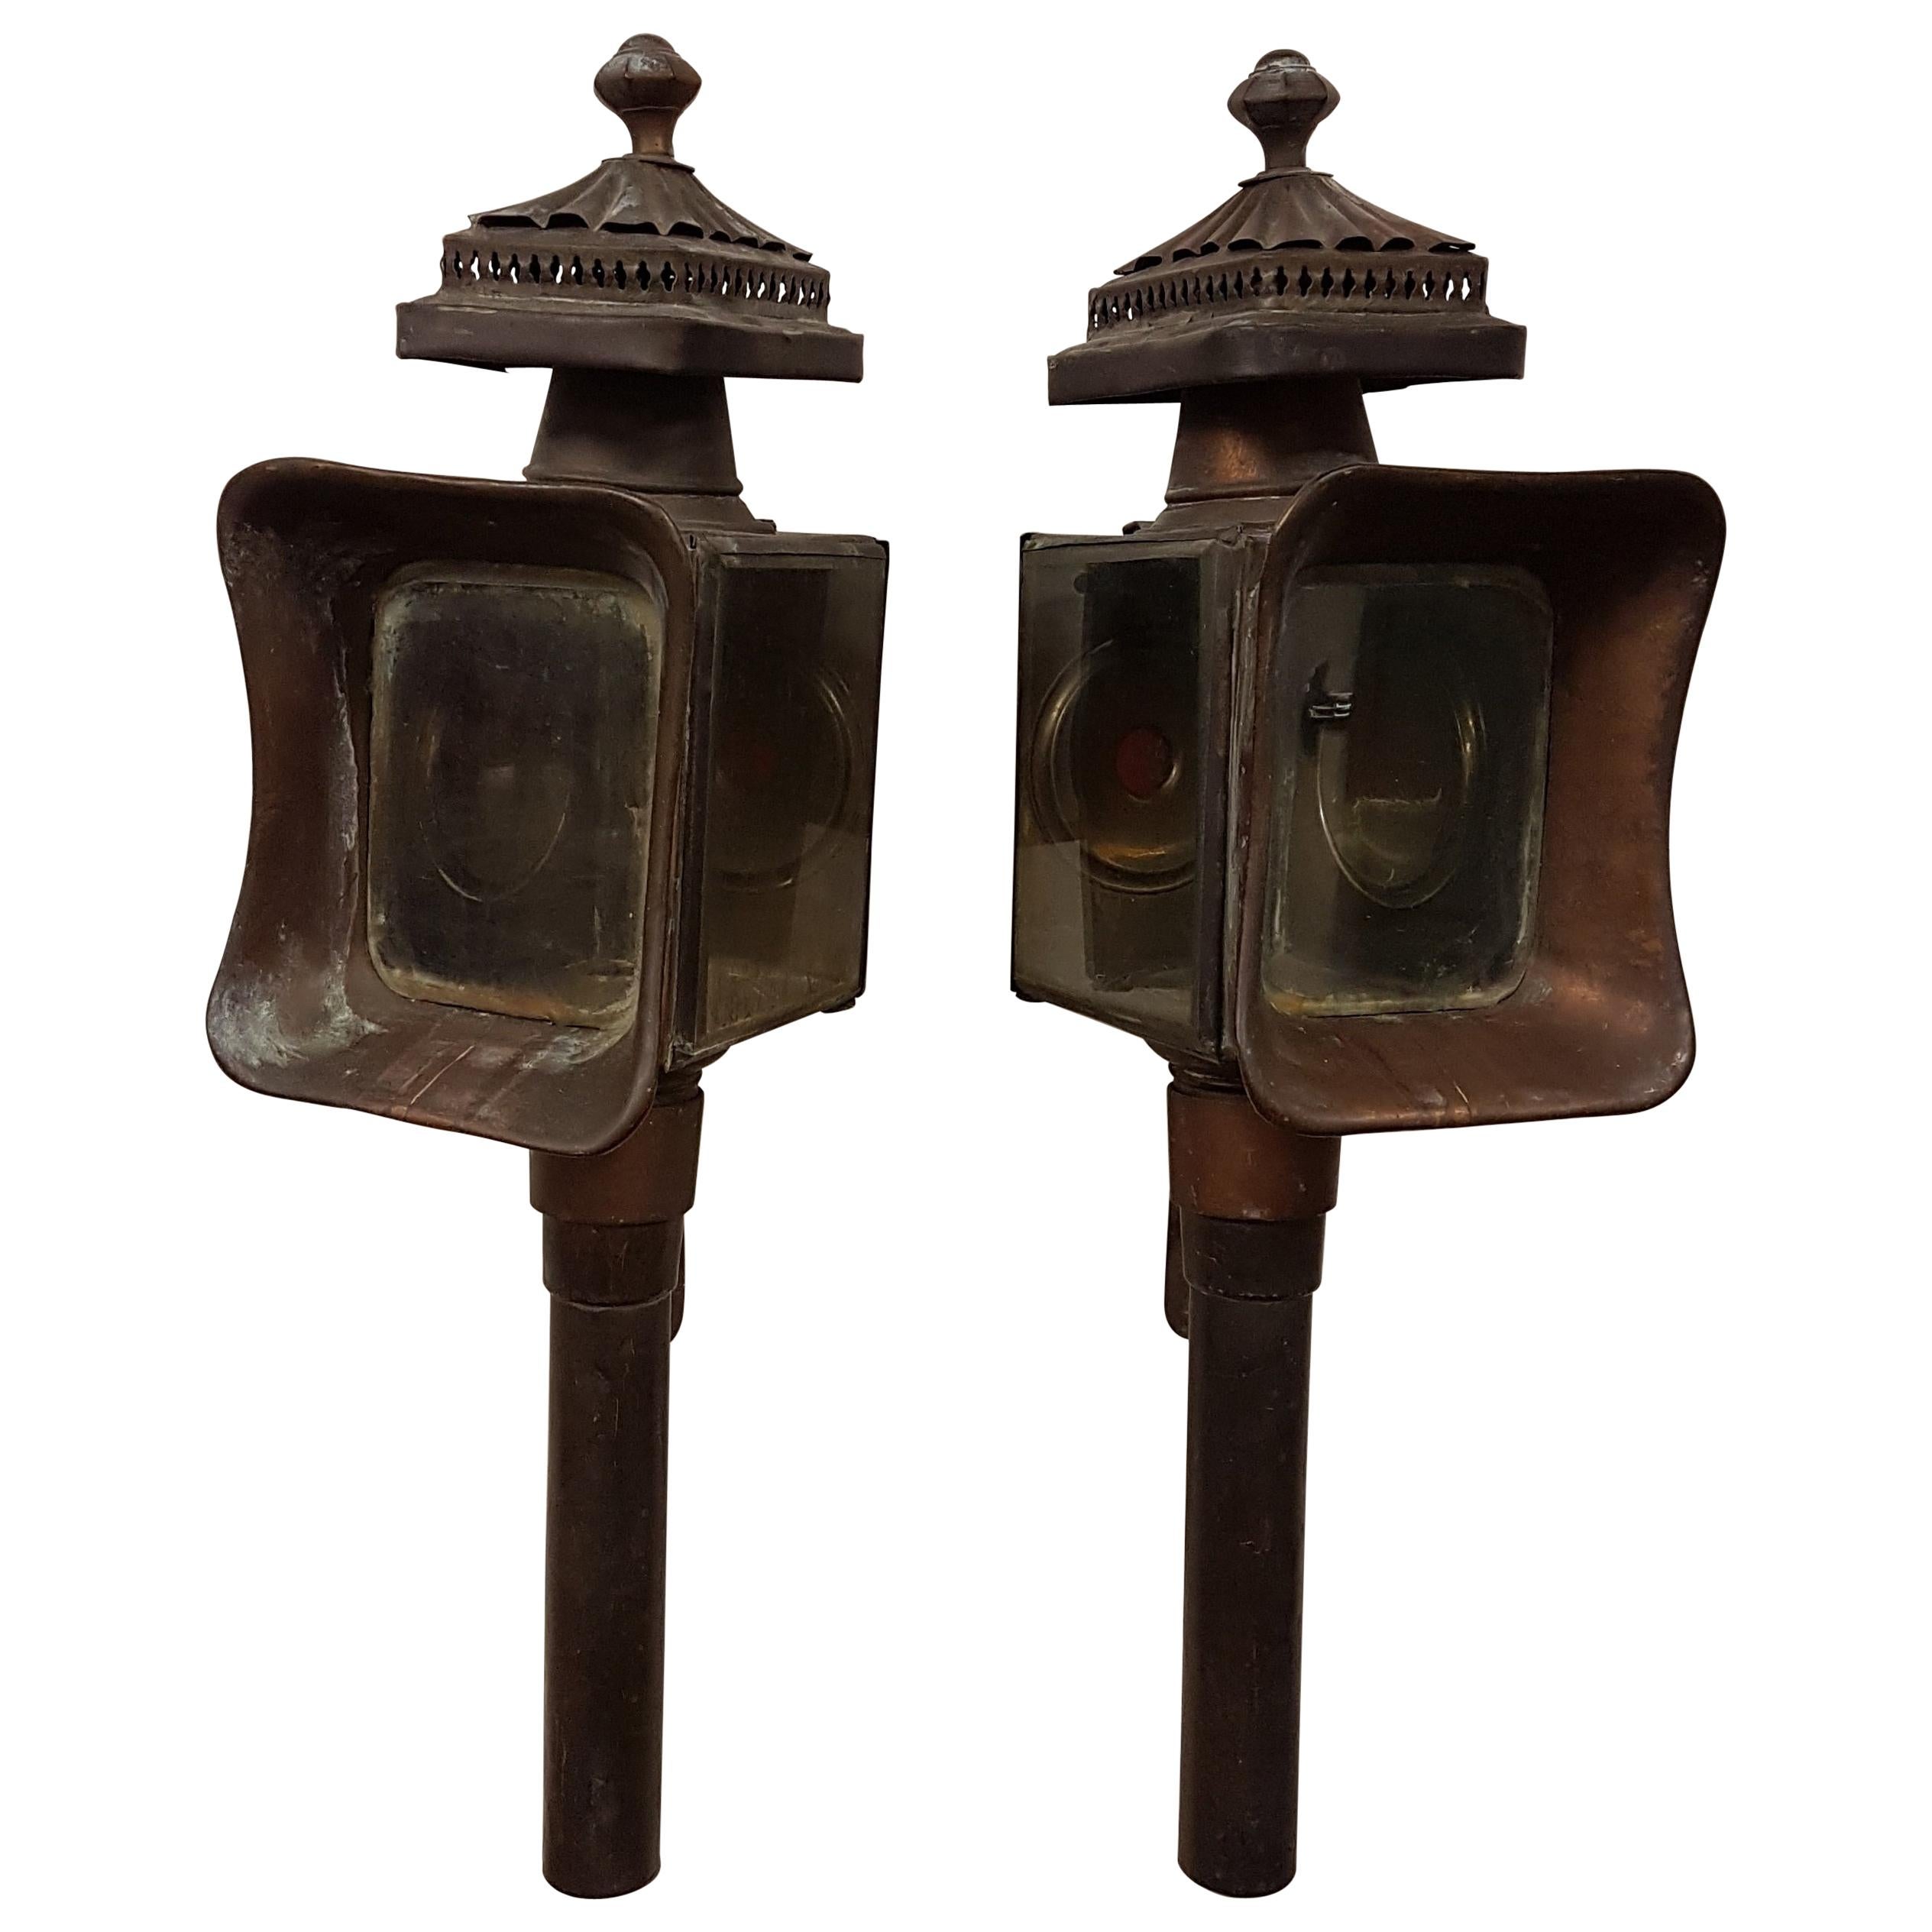 Pair of Brass and Copper Carriage Lanterns